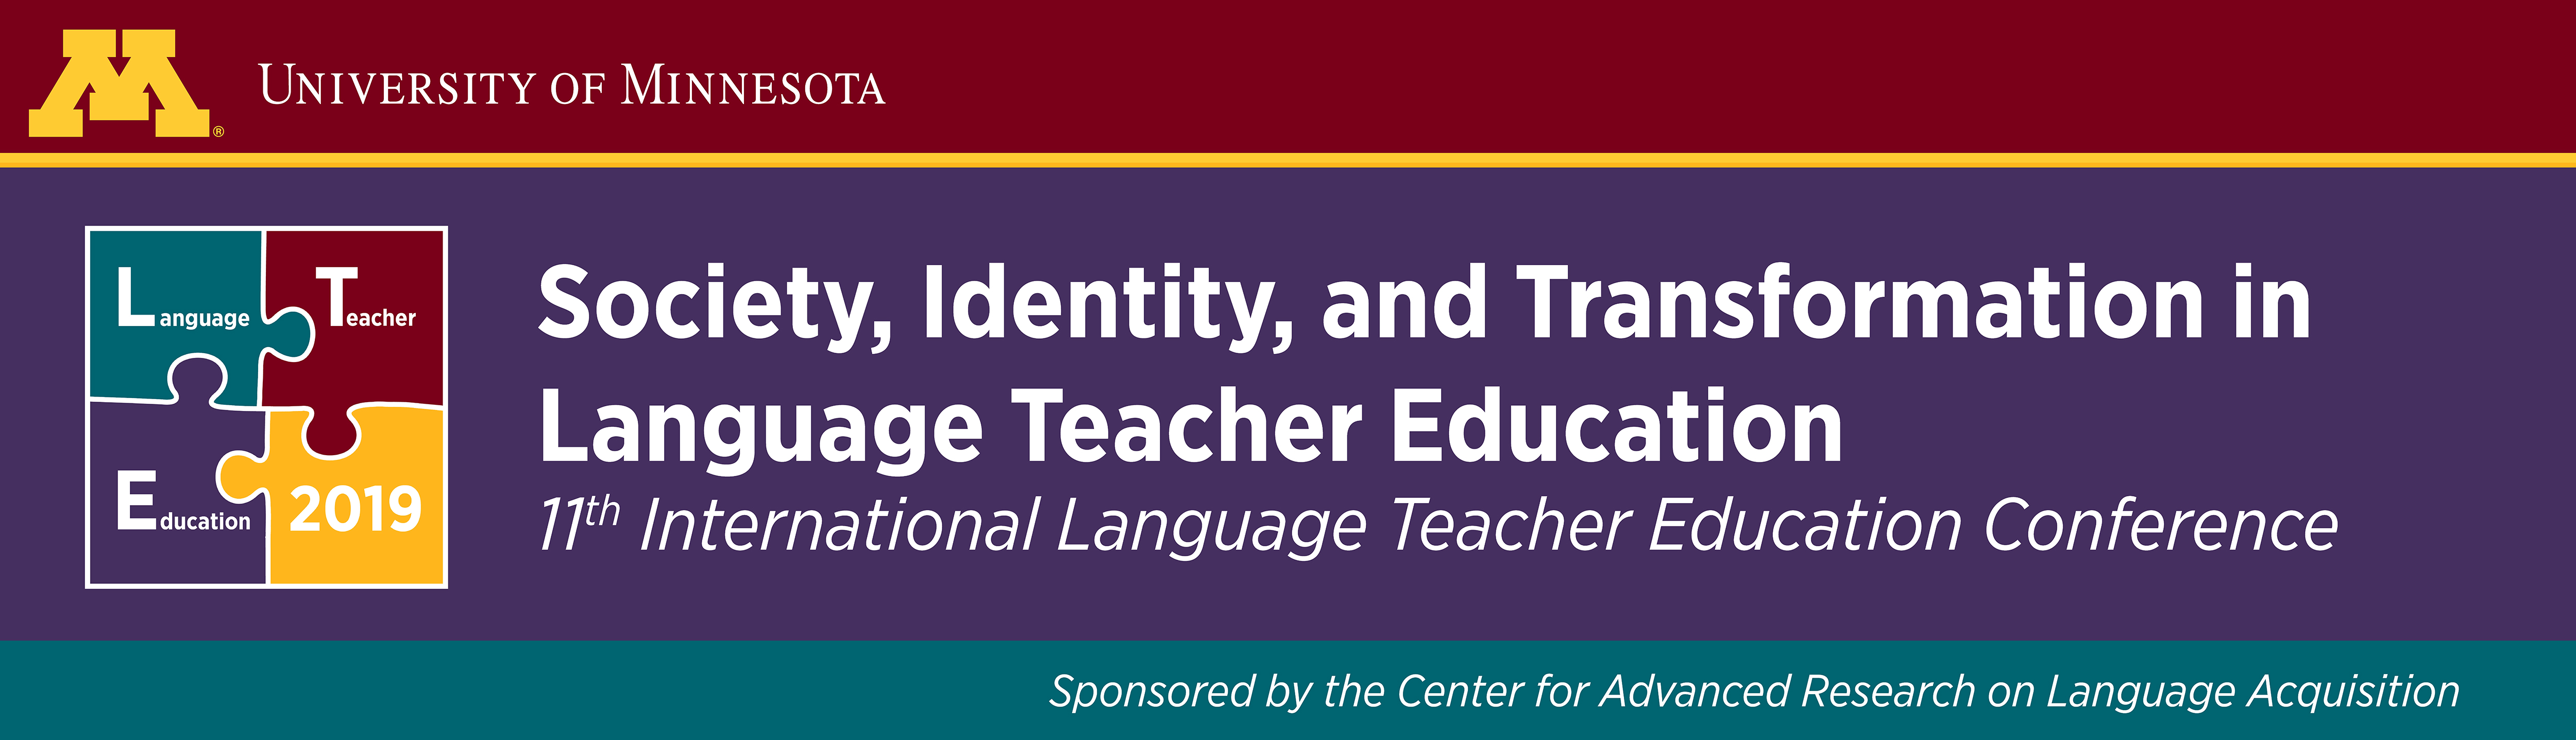 11th International Language Teacher Education Conference sponsored by the Center for Advanced Research on Language Acquisition